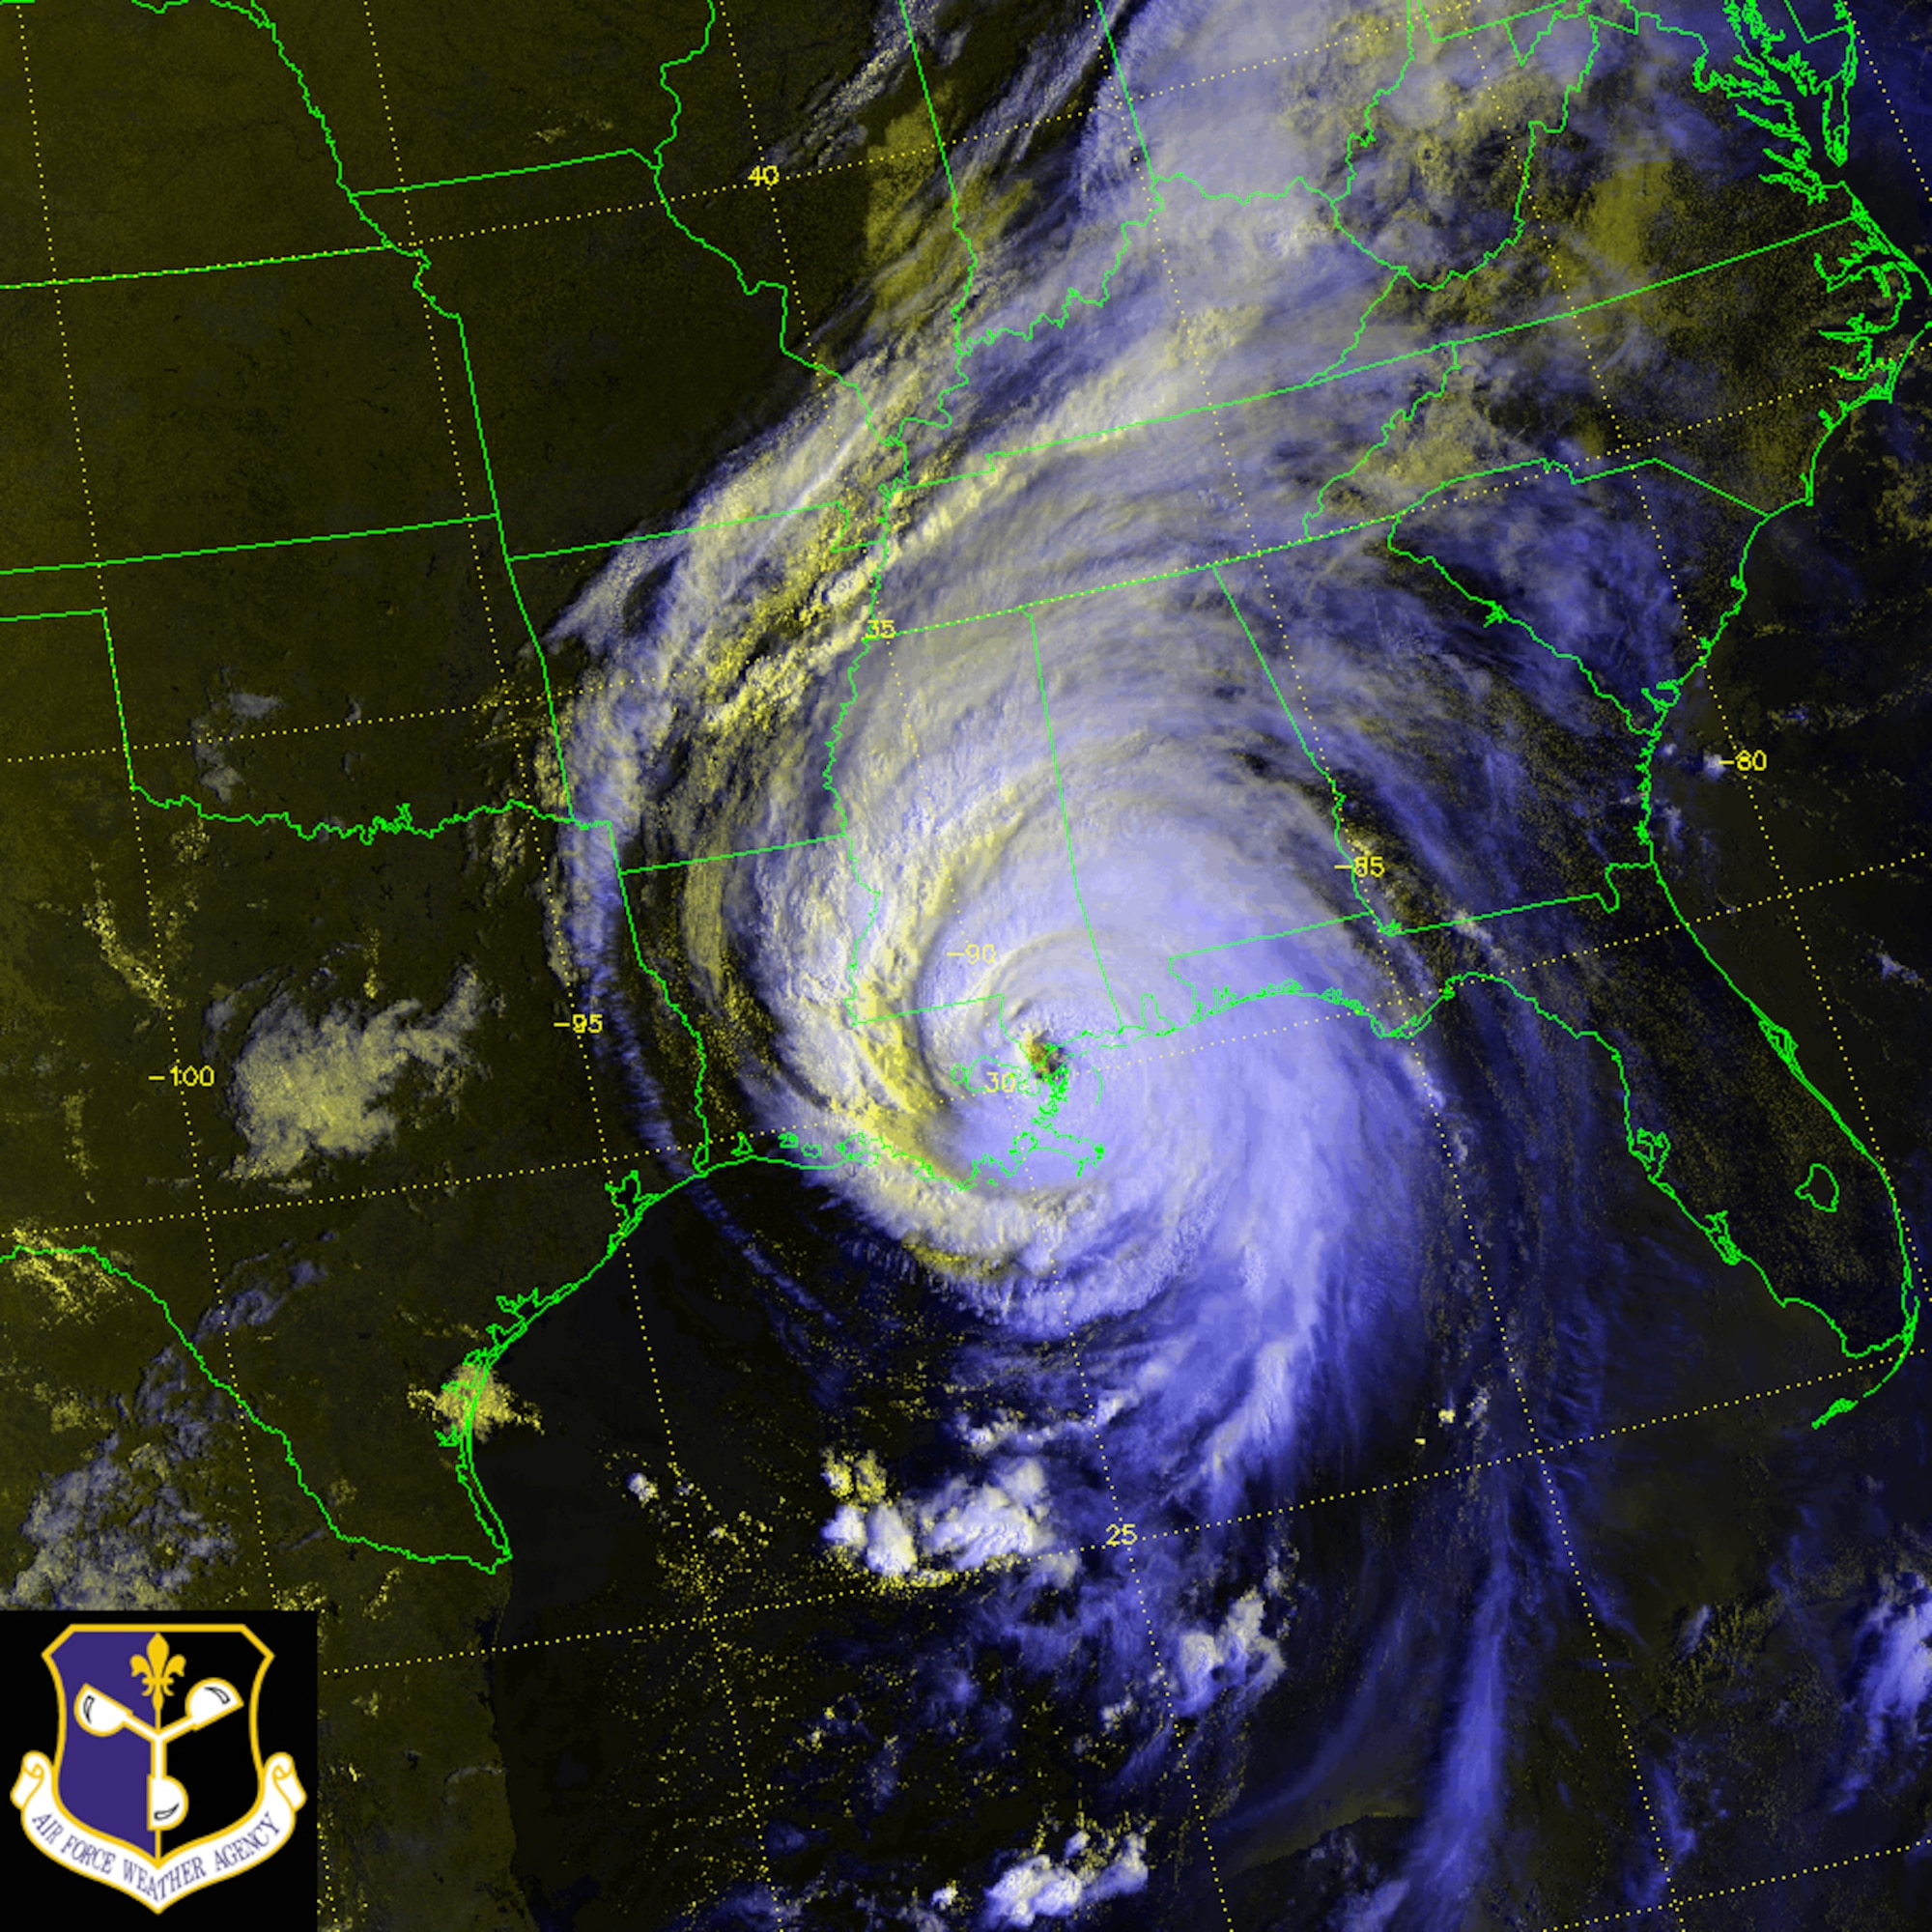 A Defense Meteorological Satellite Program satellite image of Hurricane Katrina shows the size of the storm as it made landfall on the Gulf Coast of the United States Aug. 29, 2005. The DMSP F-15 satellite provides multispectral images that use both infrared and visual satellite imagery to produce a color composite that reveals cloud depths and layers. Image courtesy of the Air Force Weather Agency. 